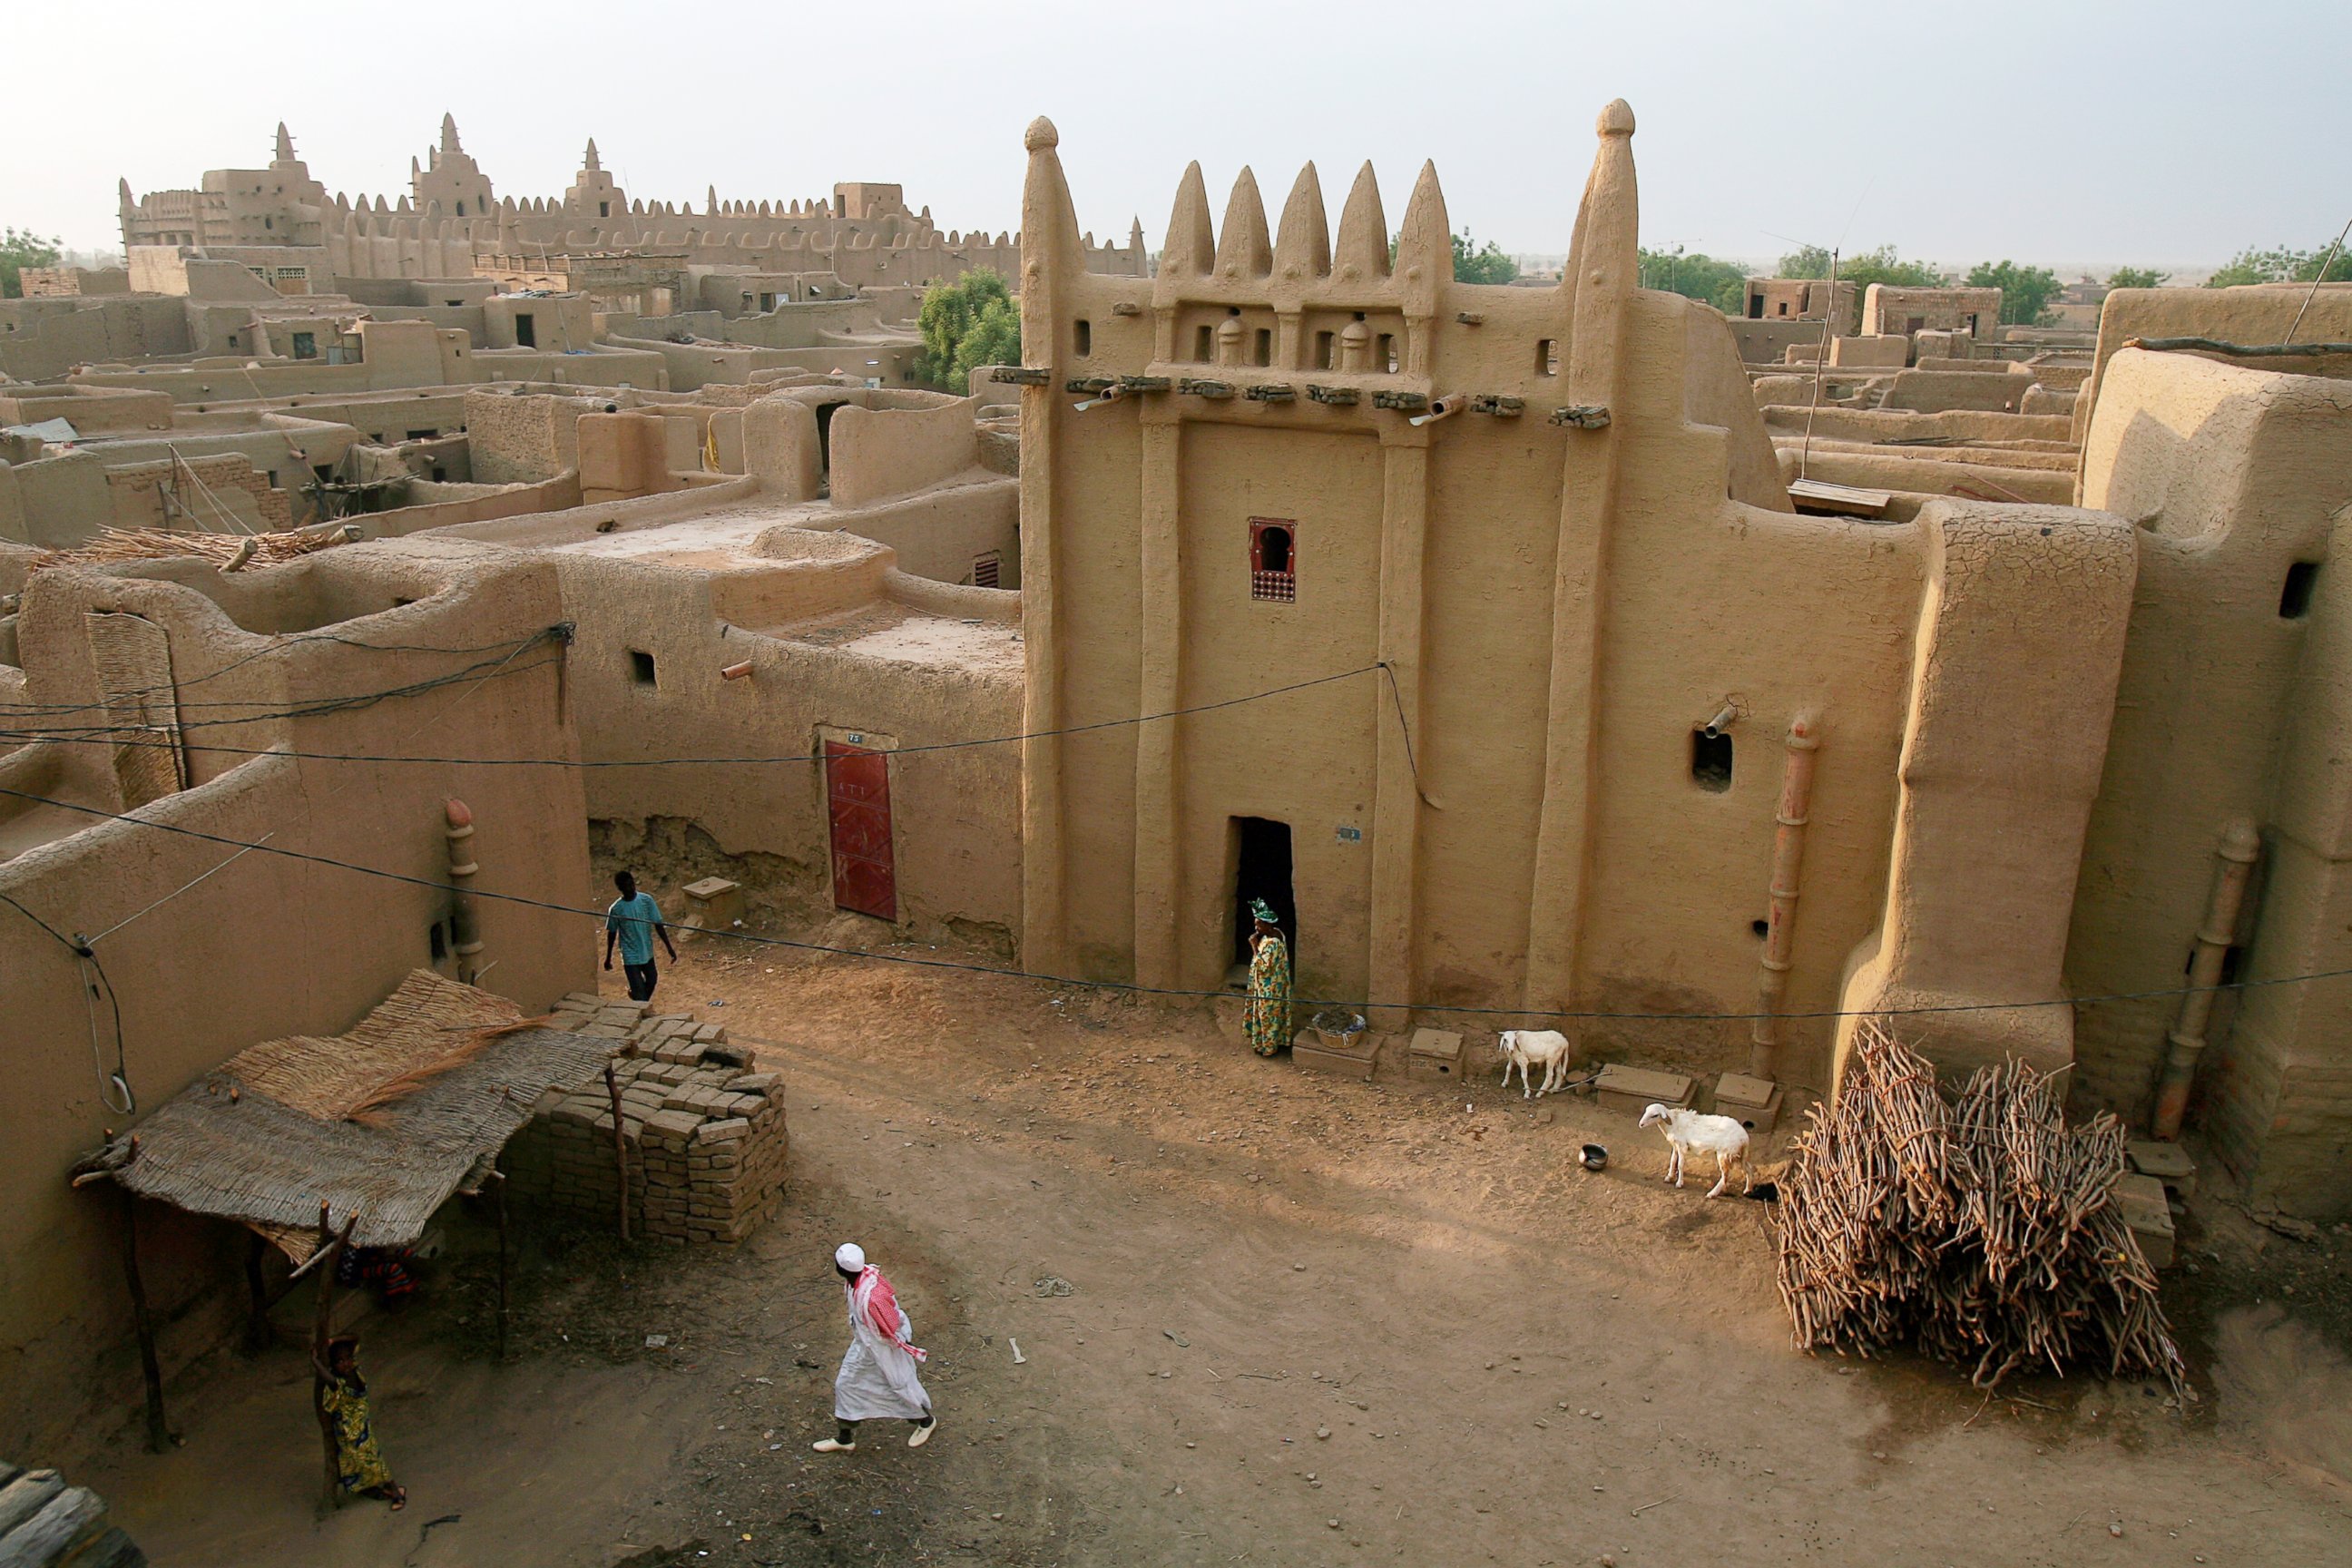 PHOTO: People walk the alleyways between mud-brick buildings in the ancient town of Djenne, Mali in this April 29, 2007 file photo.